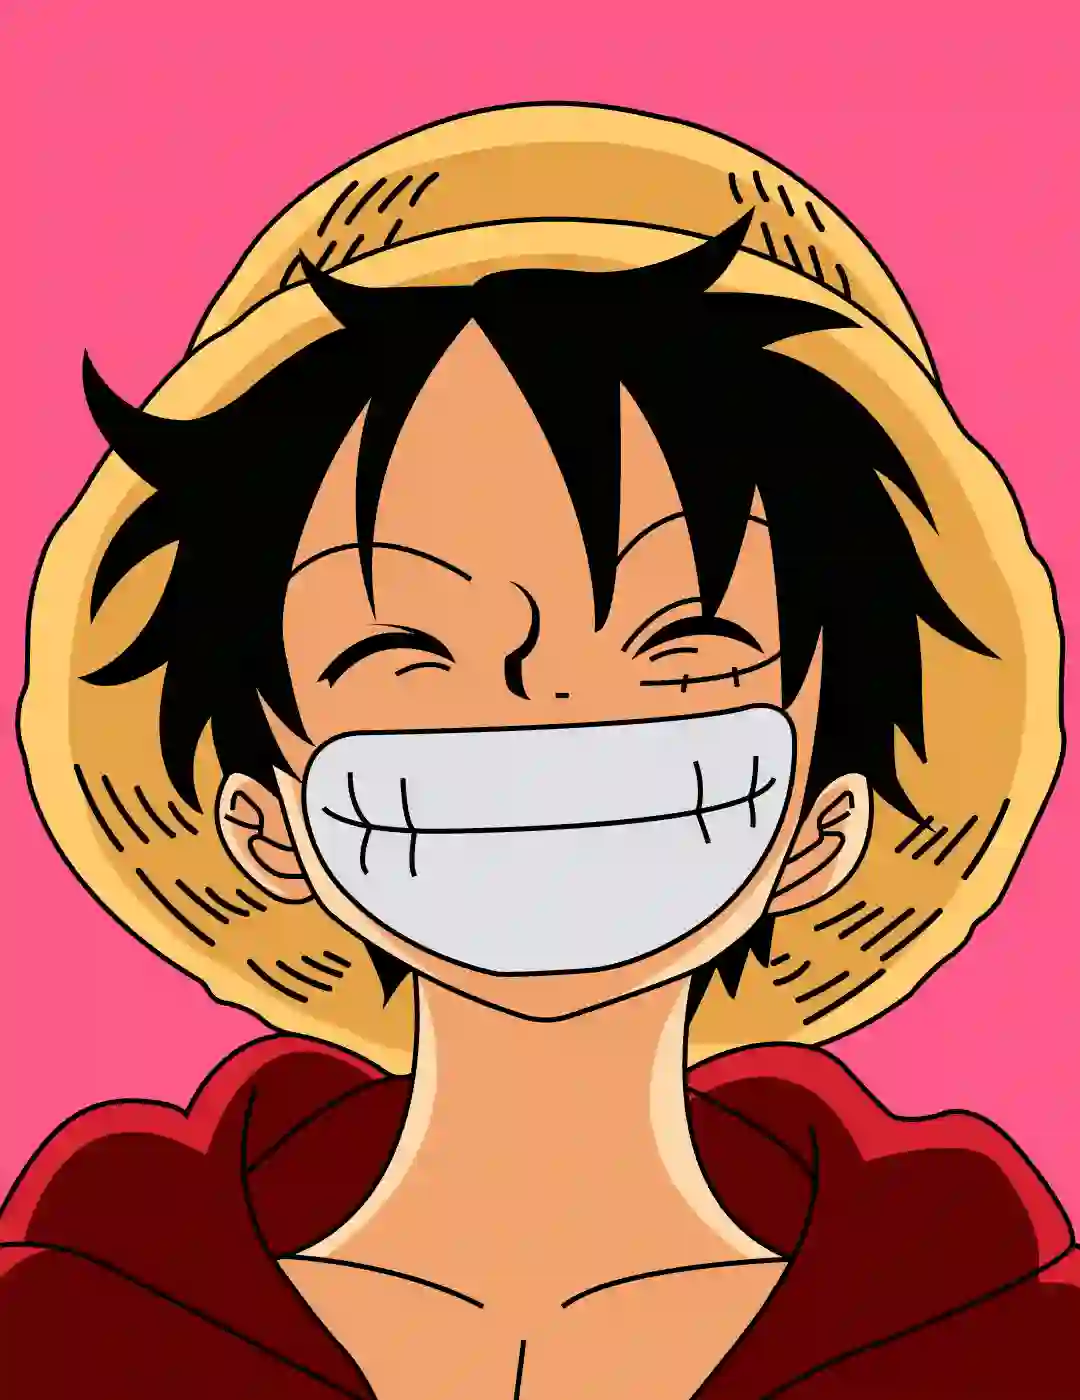 How to draw Monkey D Luffy full growth  One Piece  Sketchok easy drawing  guides